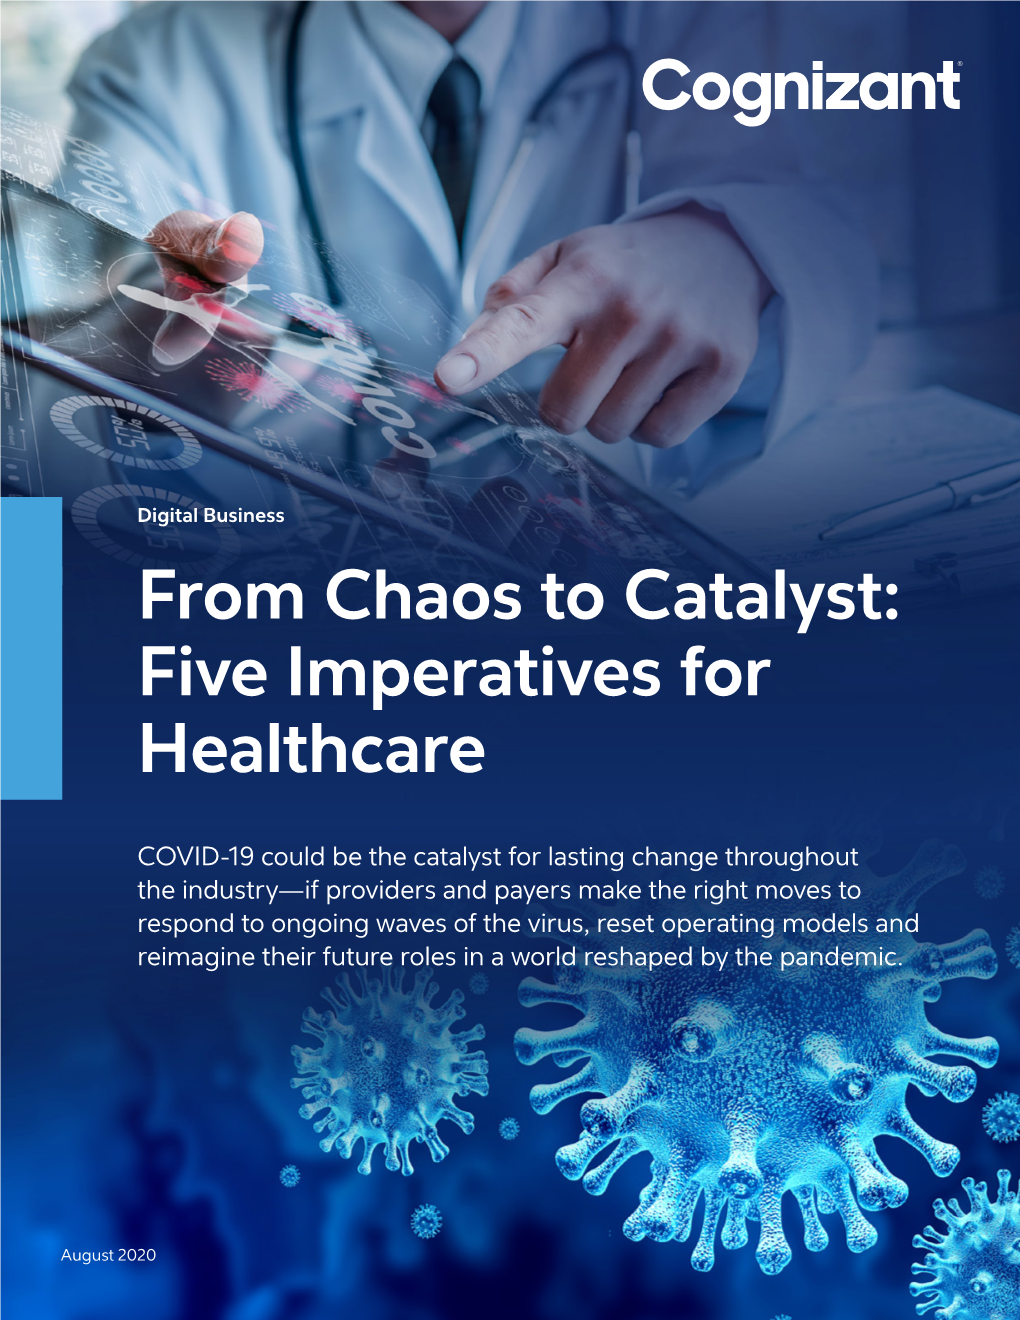 From Chaos to Catalyst: Five Imperatives for Healthcare